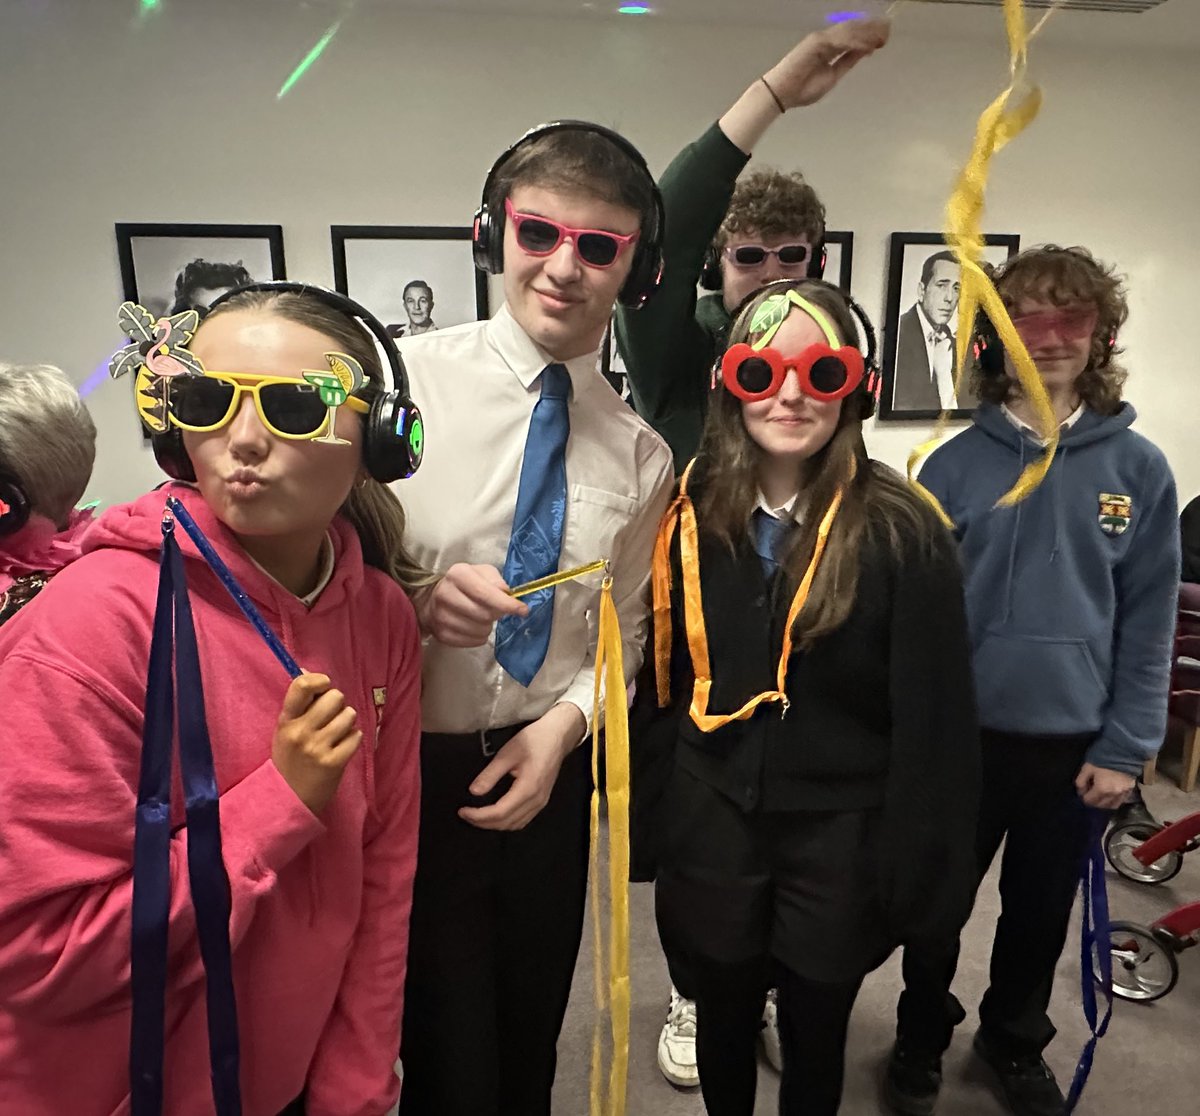 Our wonderful Captaincy Team and Student Council volunteering at our local Care Home #silentdisco #succeedingtogether